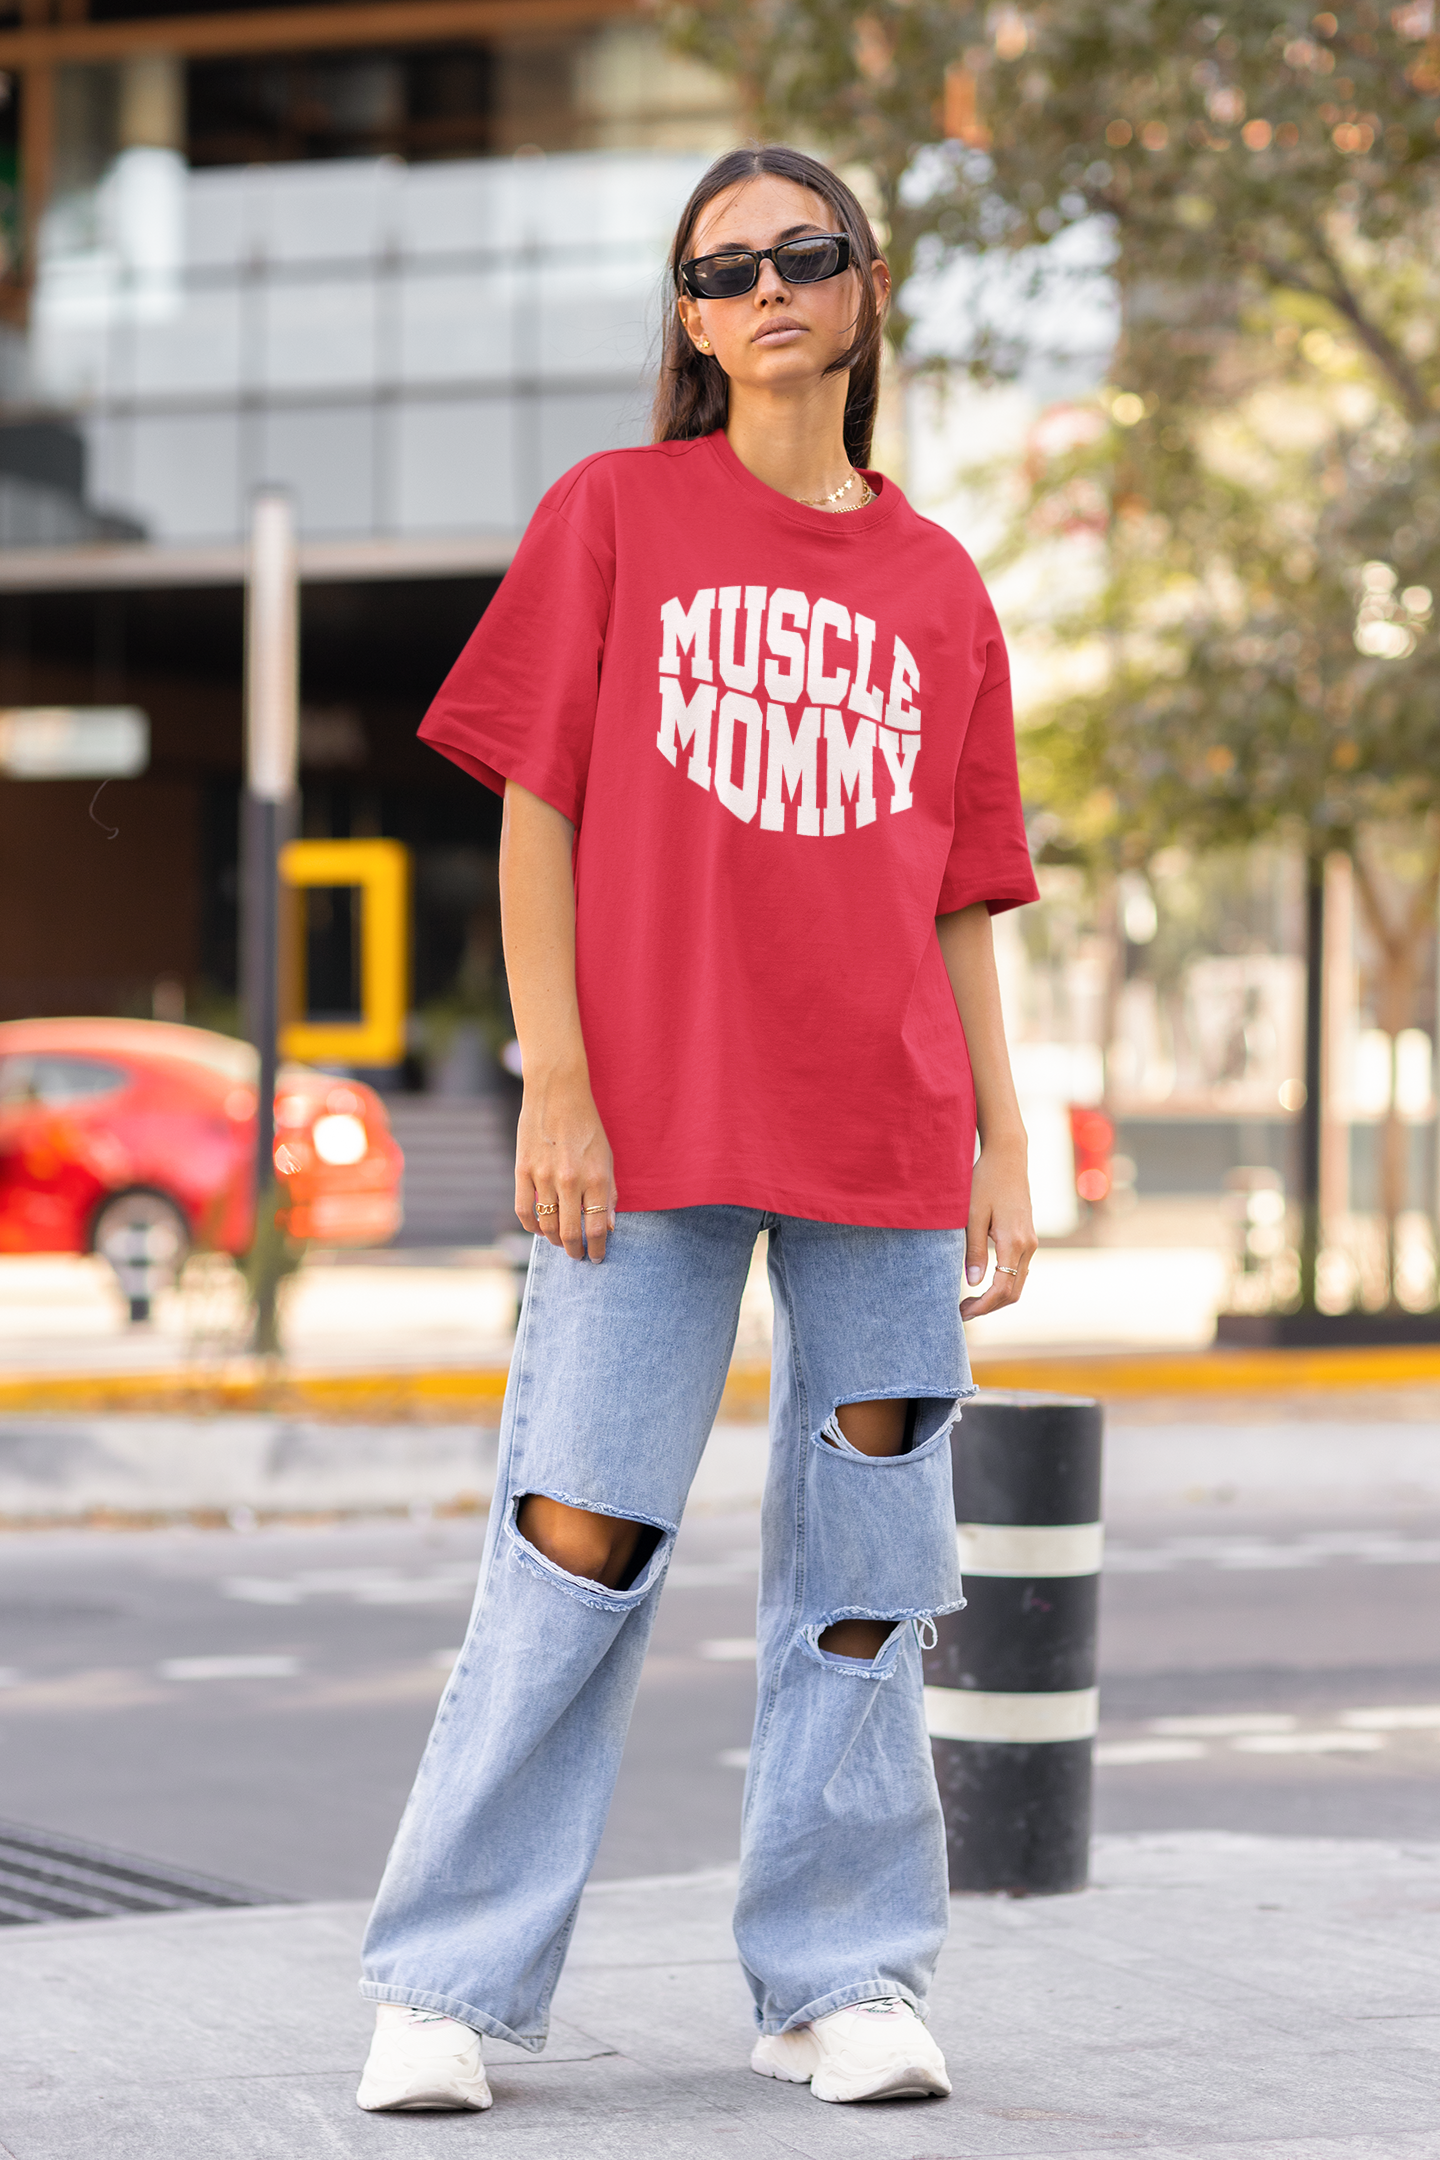 MUSCLE MOMMY T-SHIRT